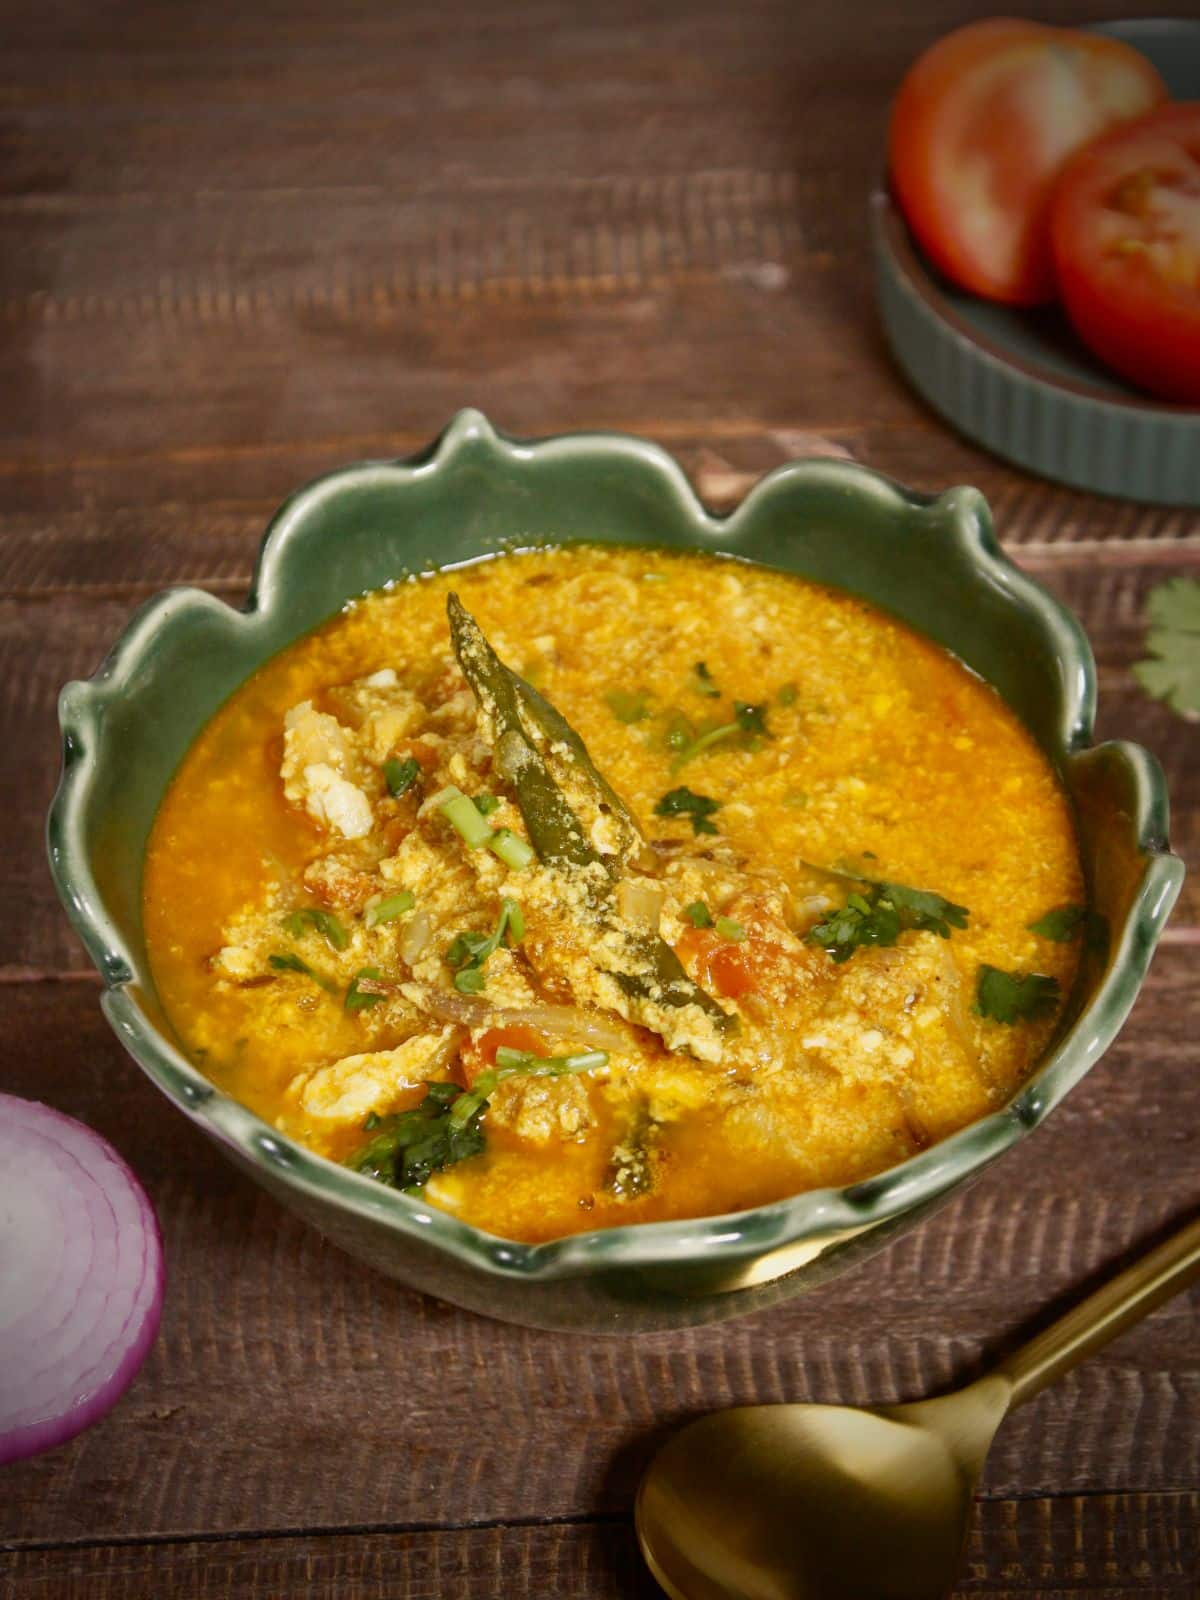 garnish Assamese style tomato egg curry with some coriander leaves and serve with rice or rotis